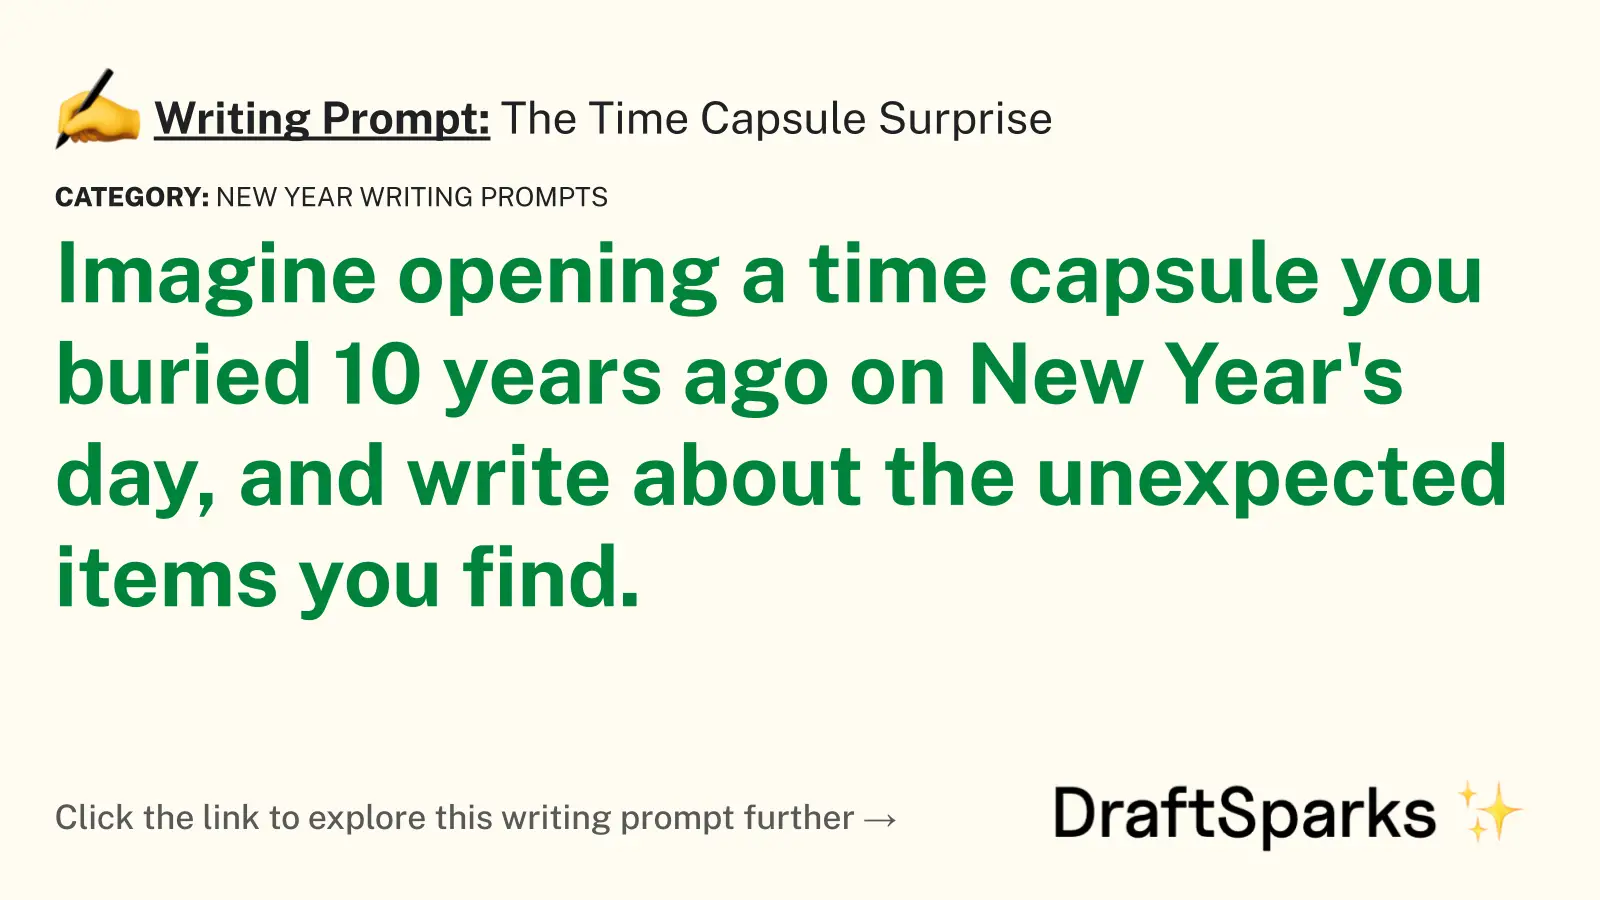 The Time Capsule Surprise